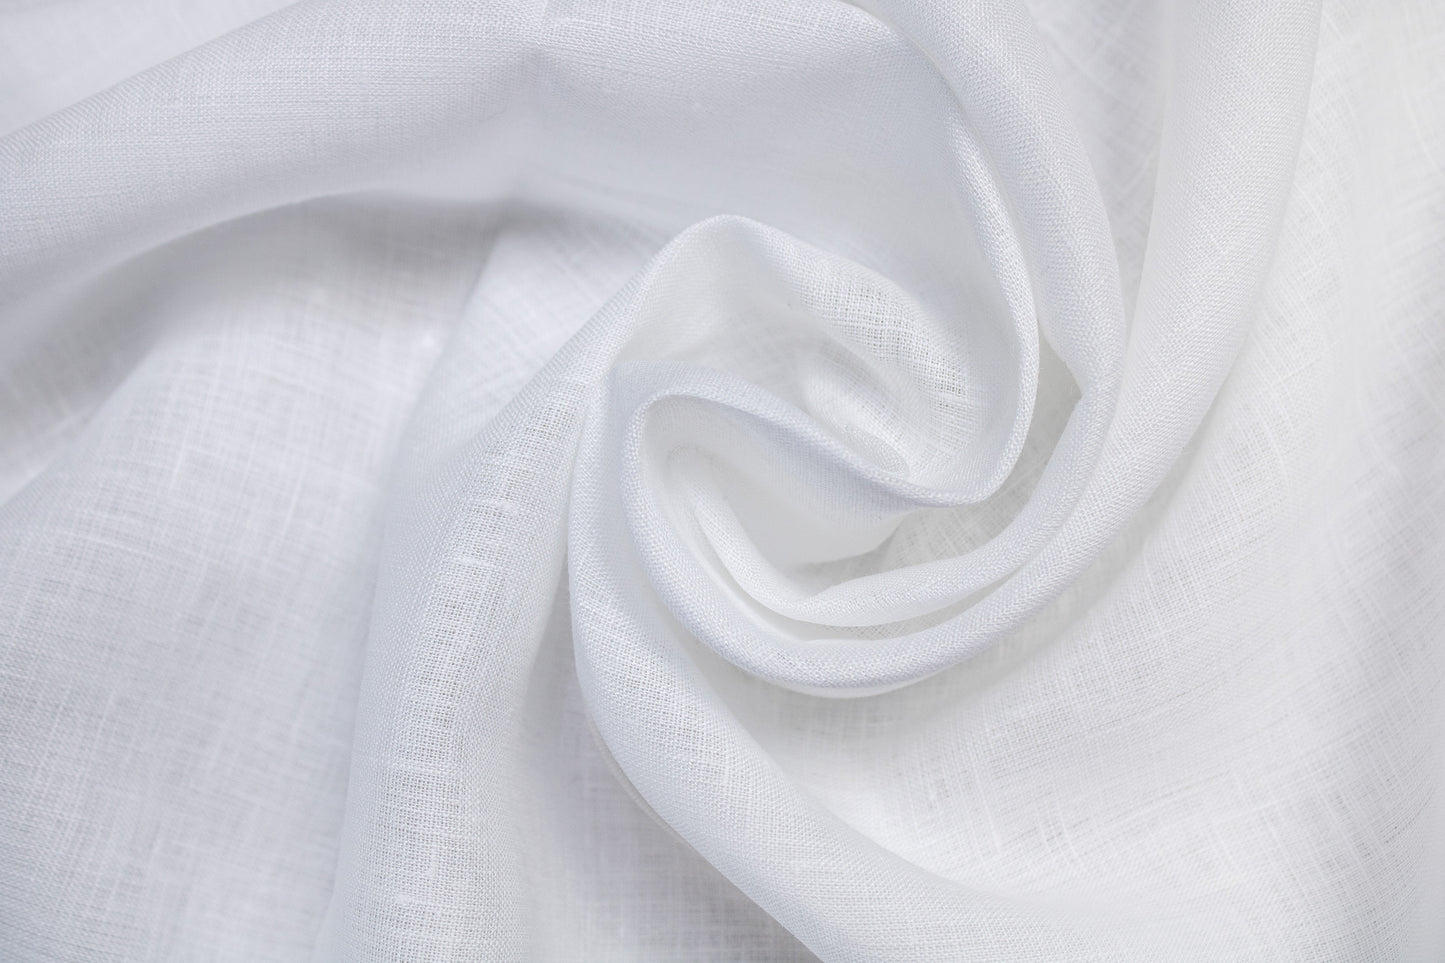 Fabric - Pure Natural Linen Fabric - Soft Fabric